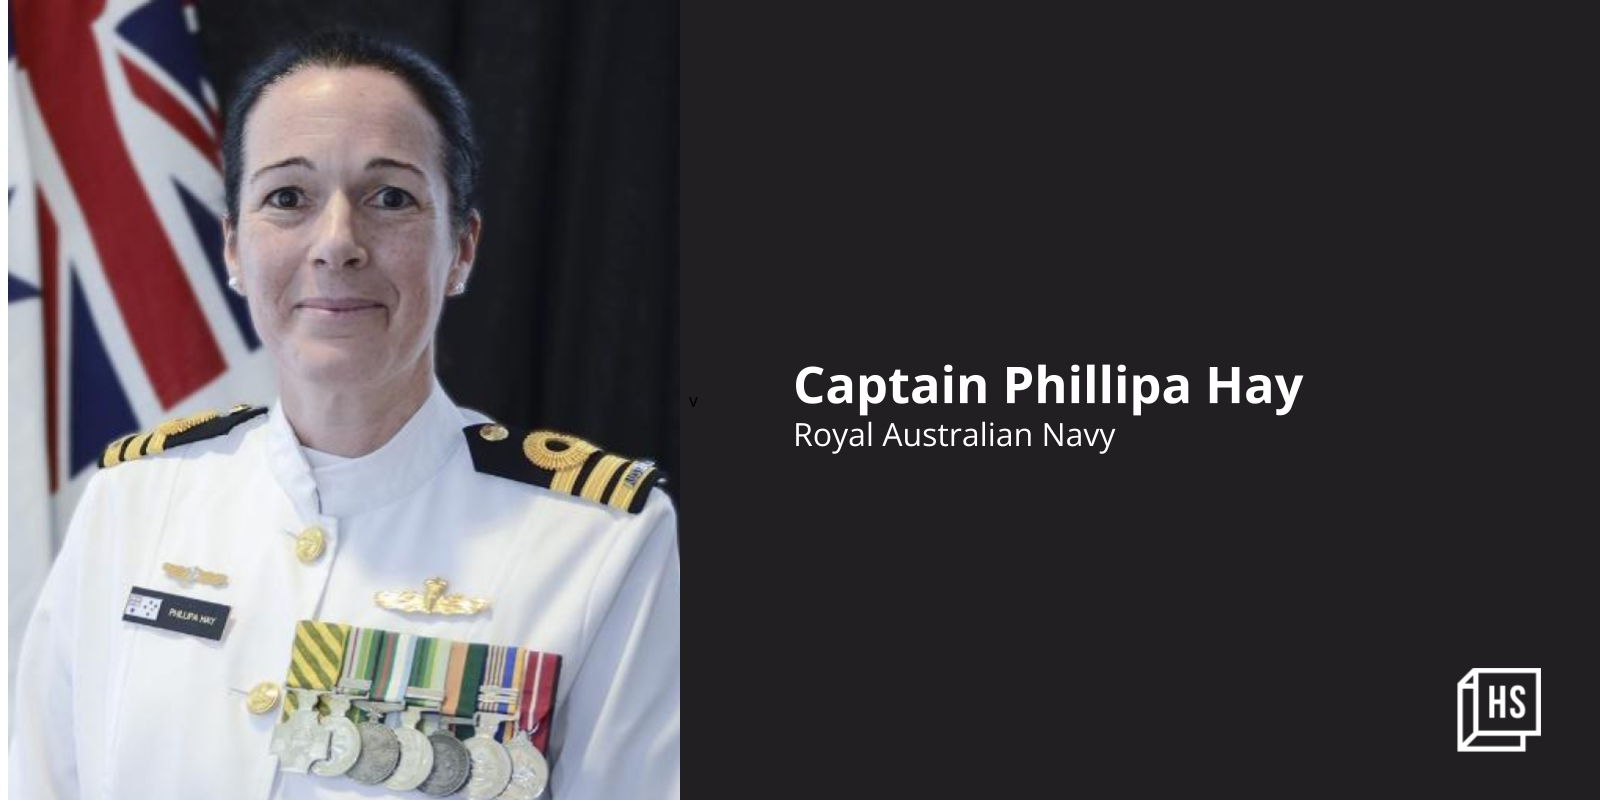 Policies that impede a woman’s ability to serve must change: Captain Phillipa Hay of Royal Australian Navy